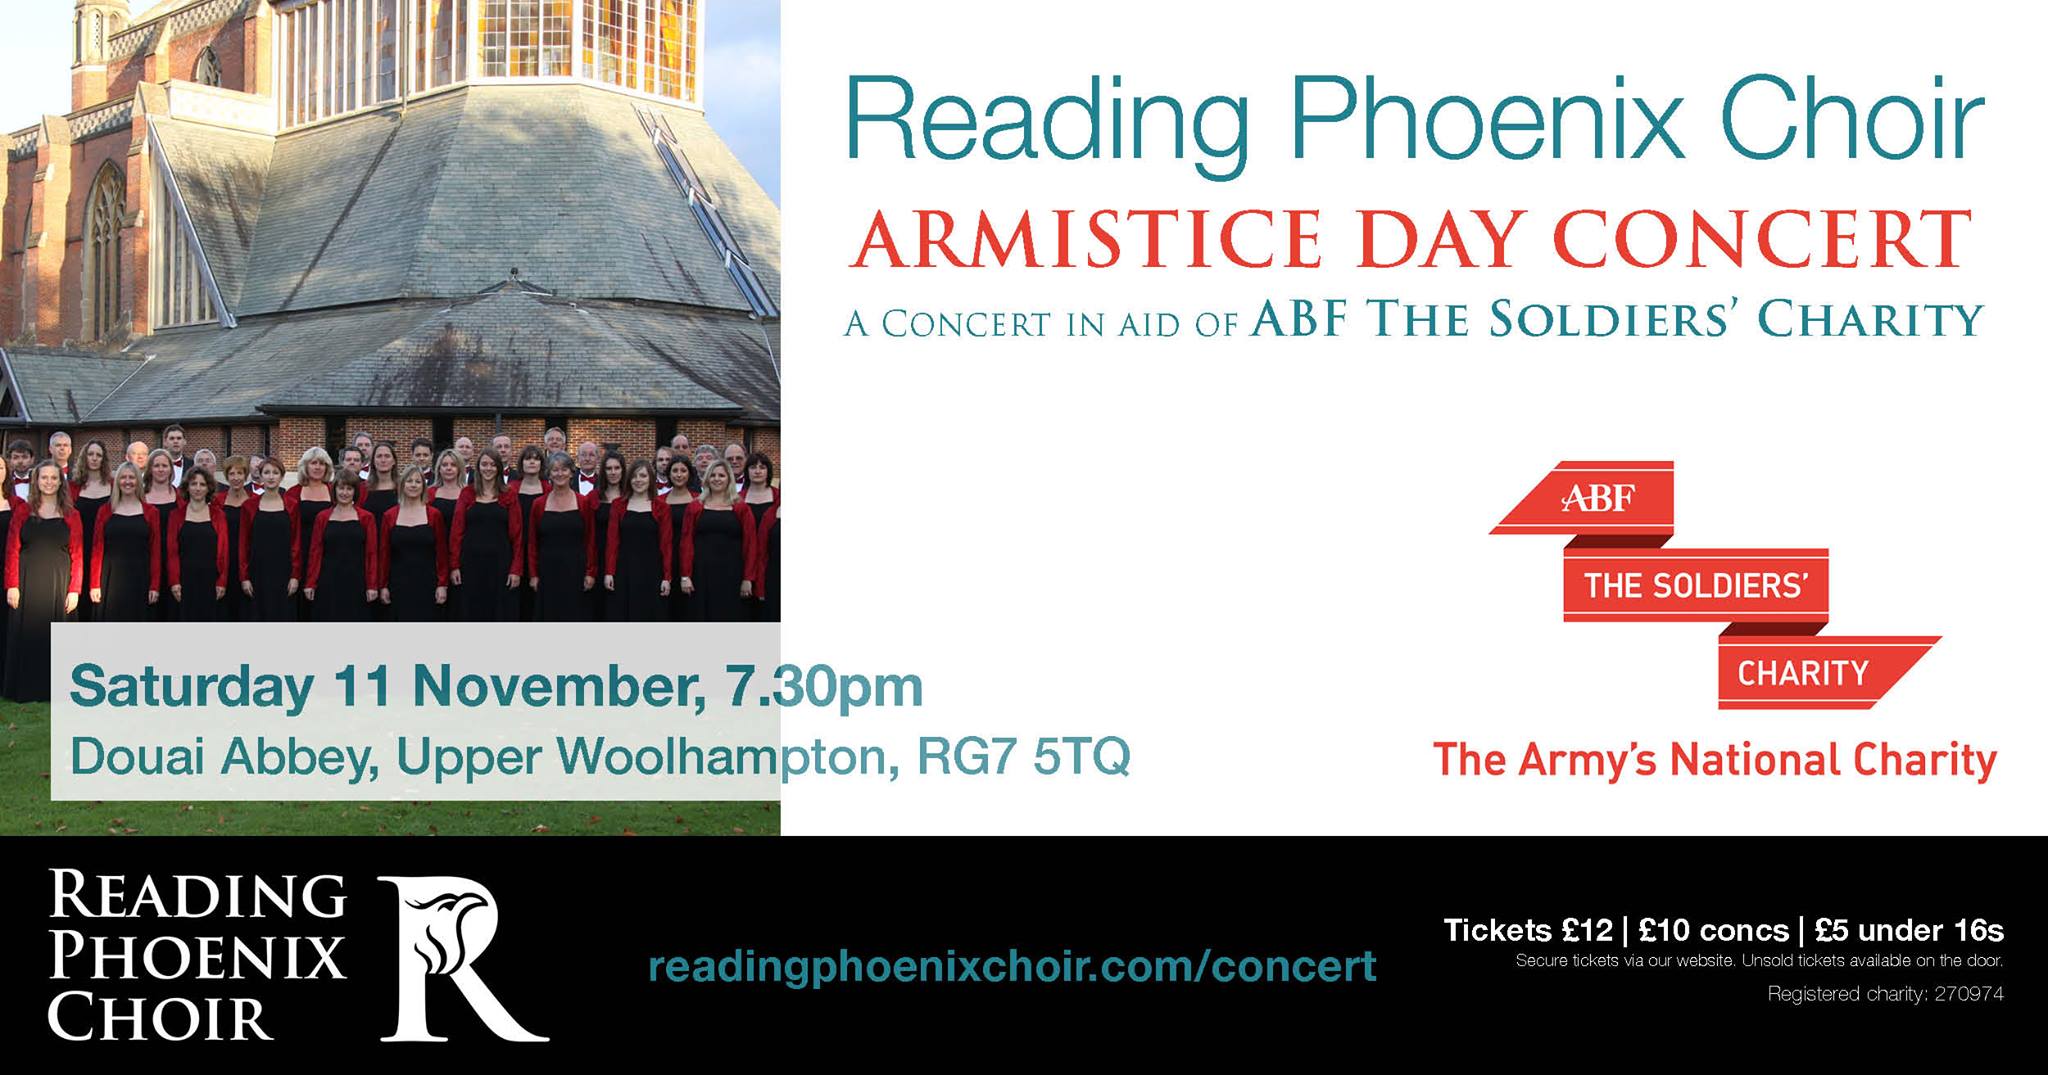 Armistice Day concert to raise money for ABF The Soldiers’ Charity